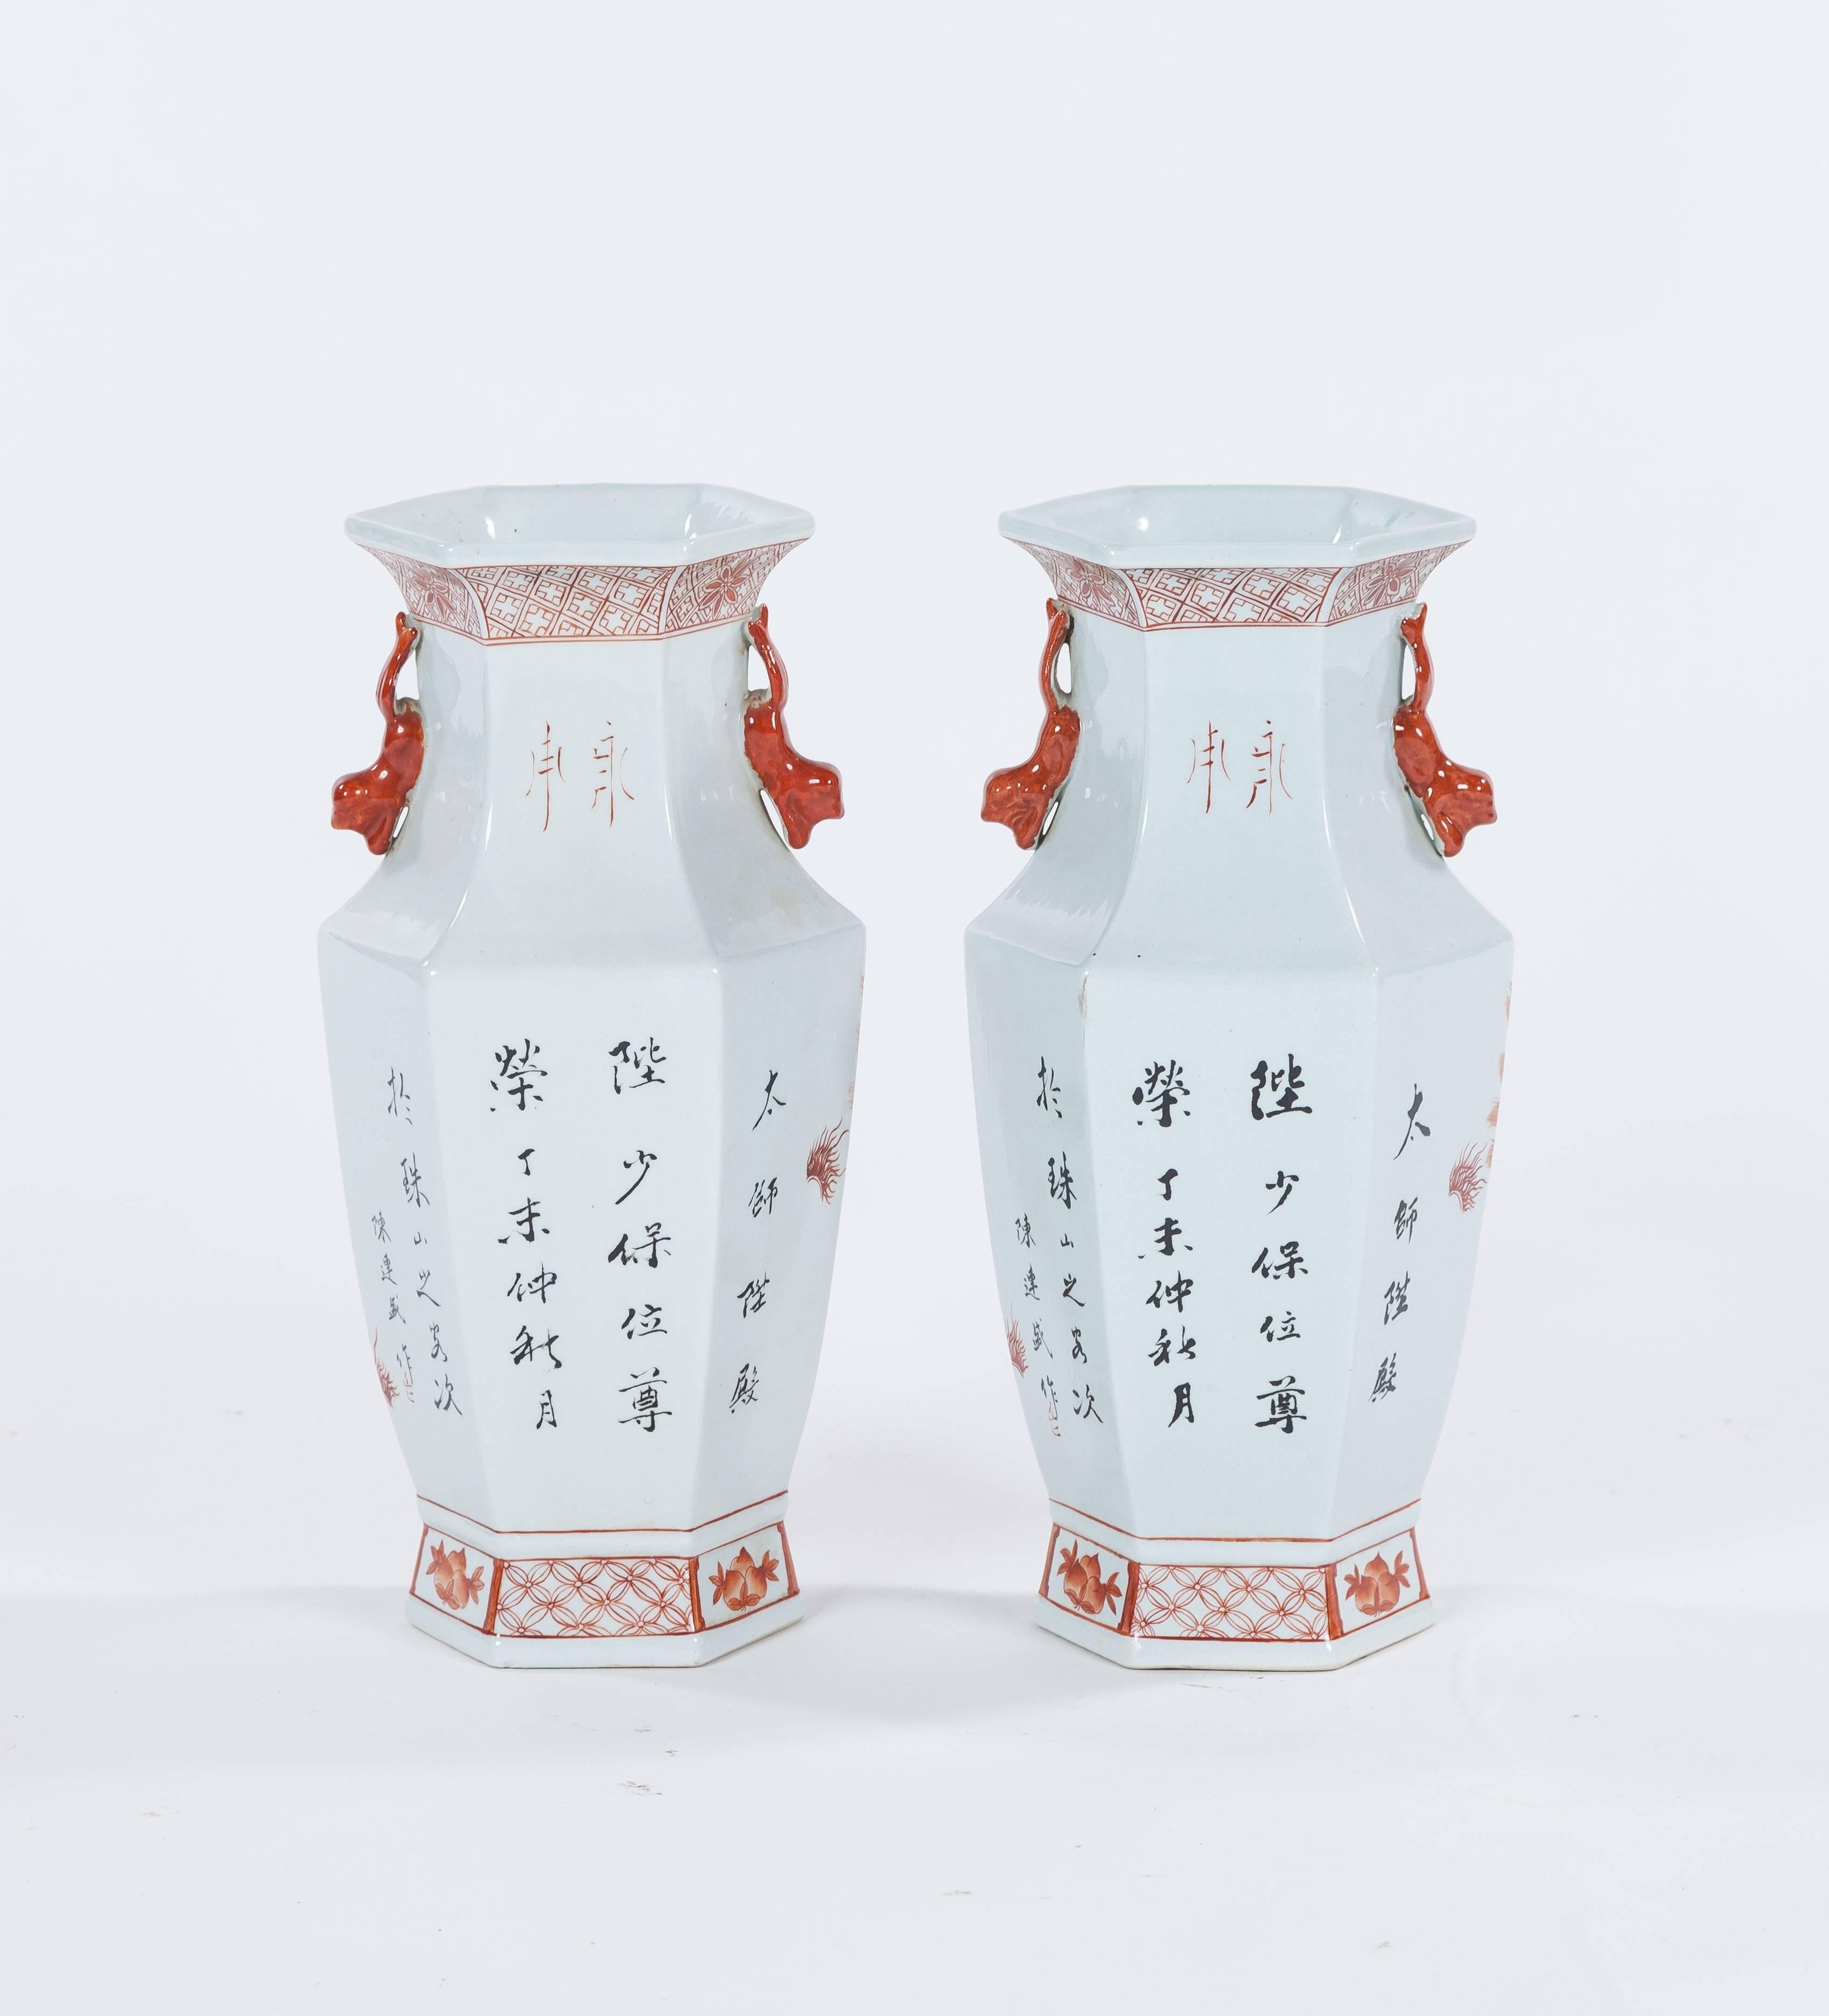 A set of two vintage orange and white Chinese porcelain vases dating to the early 20th century. Each vase measures approximately 7